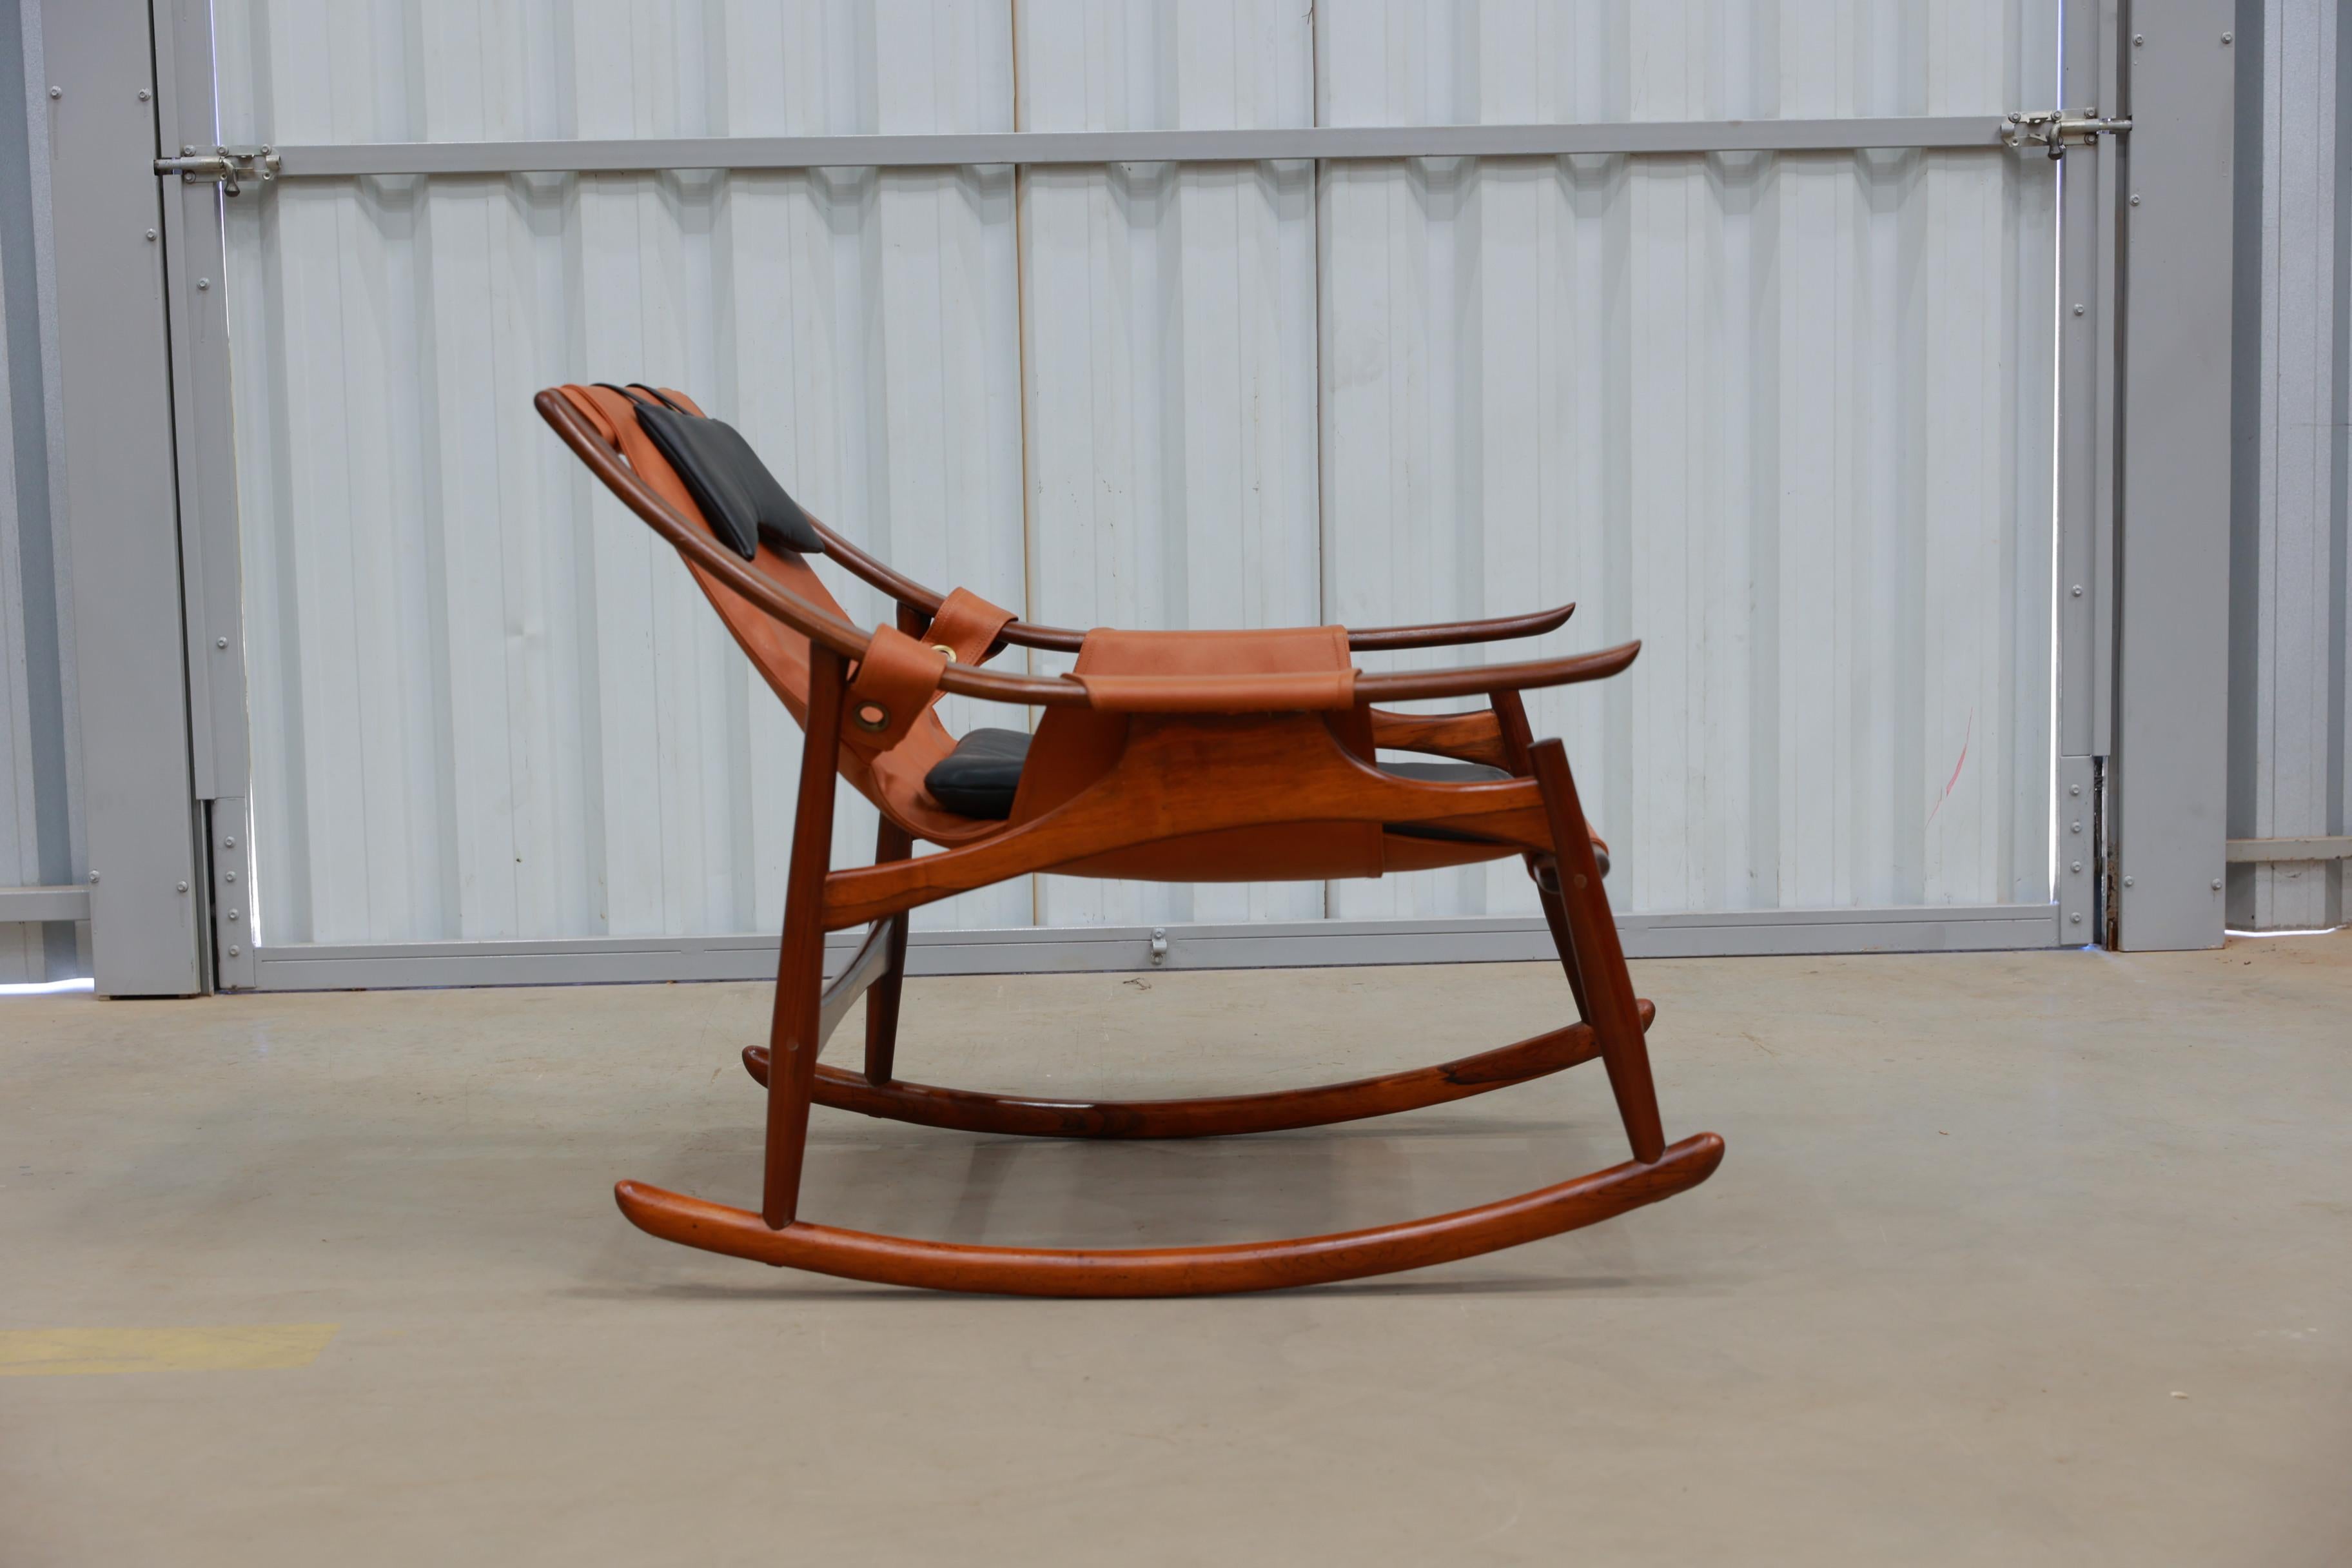 Hand-Carved Brazilian Modern Rocking Chair & Ottoman in Hardwood & Leather, Liceu de Artes For Sale